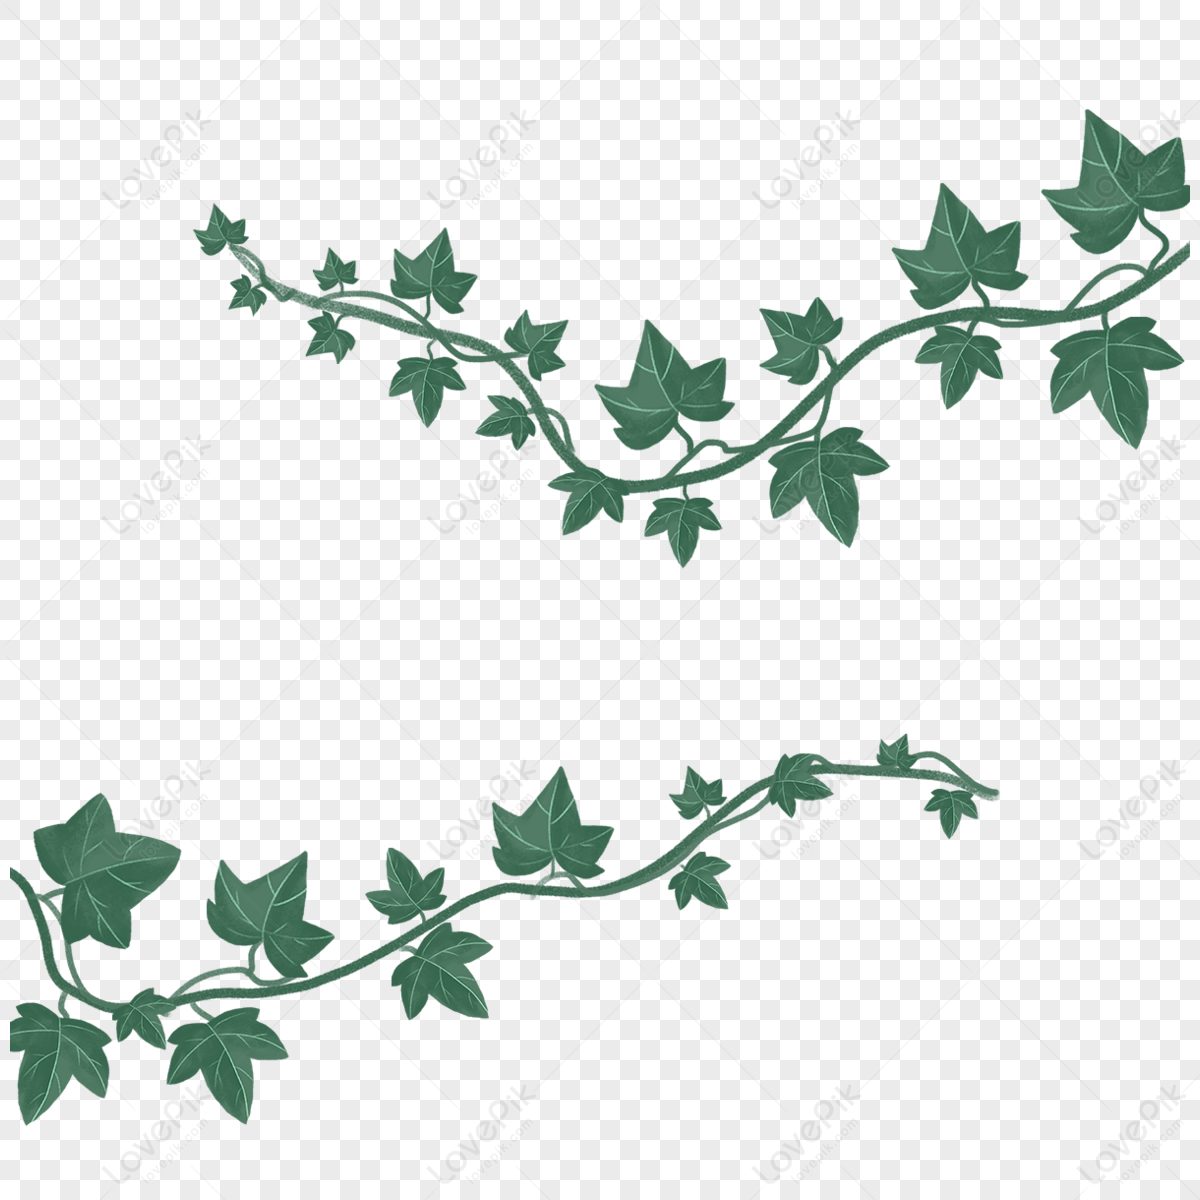 Ivy leaves clipart. Free download transparent .PNG